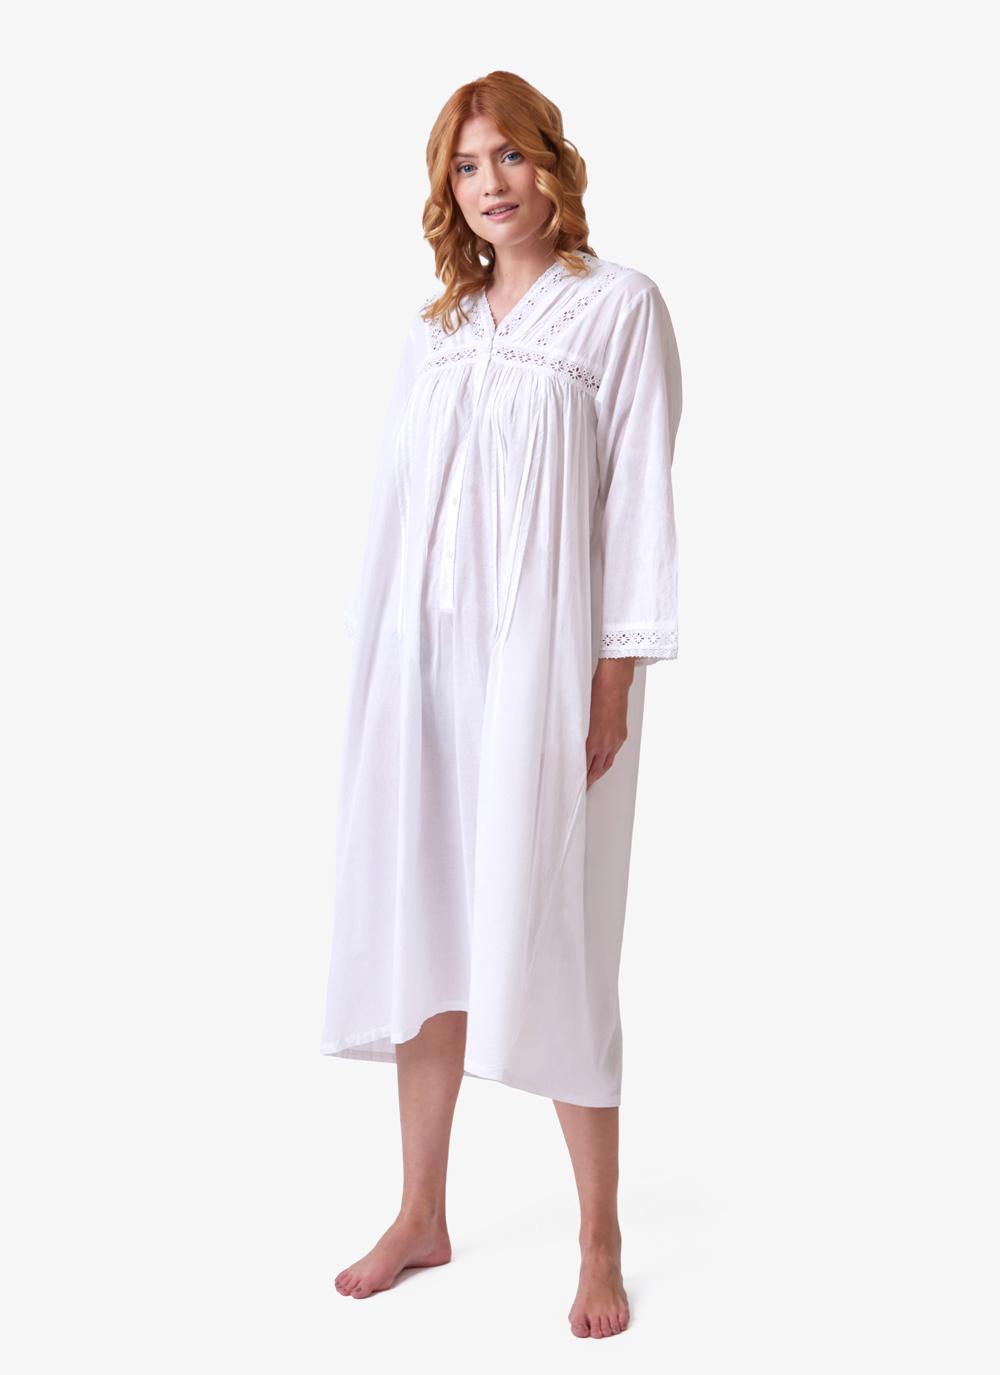 April Long Sleeve Cotton Nightgown in White | Blarney